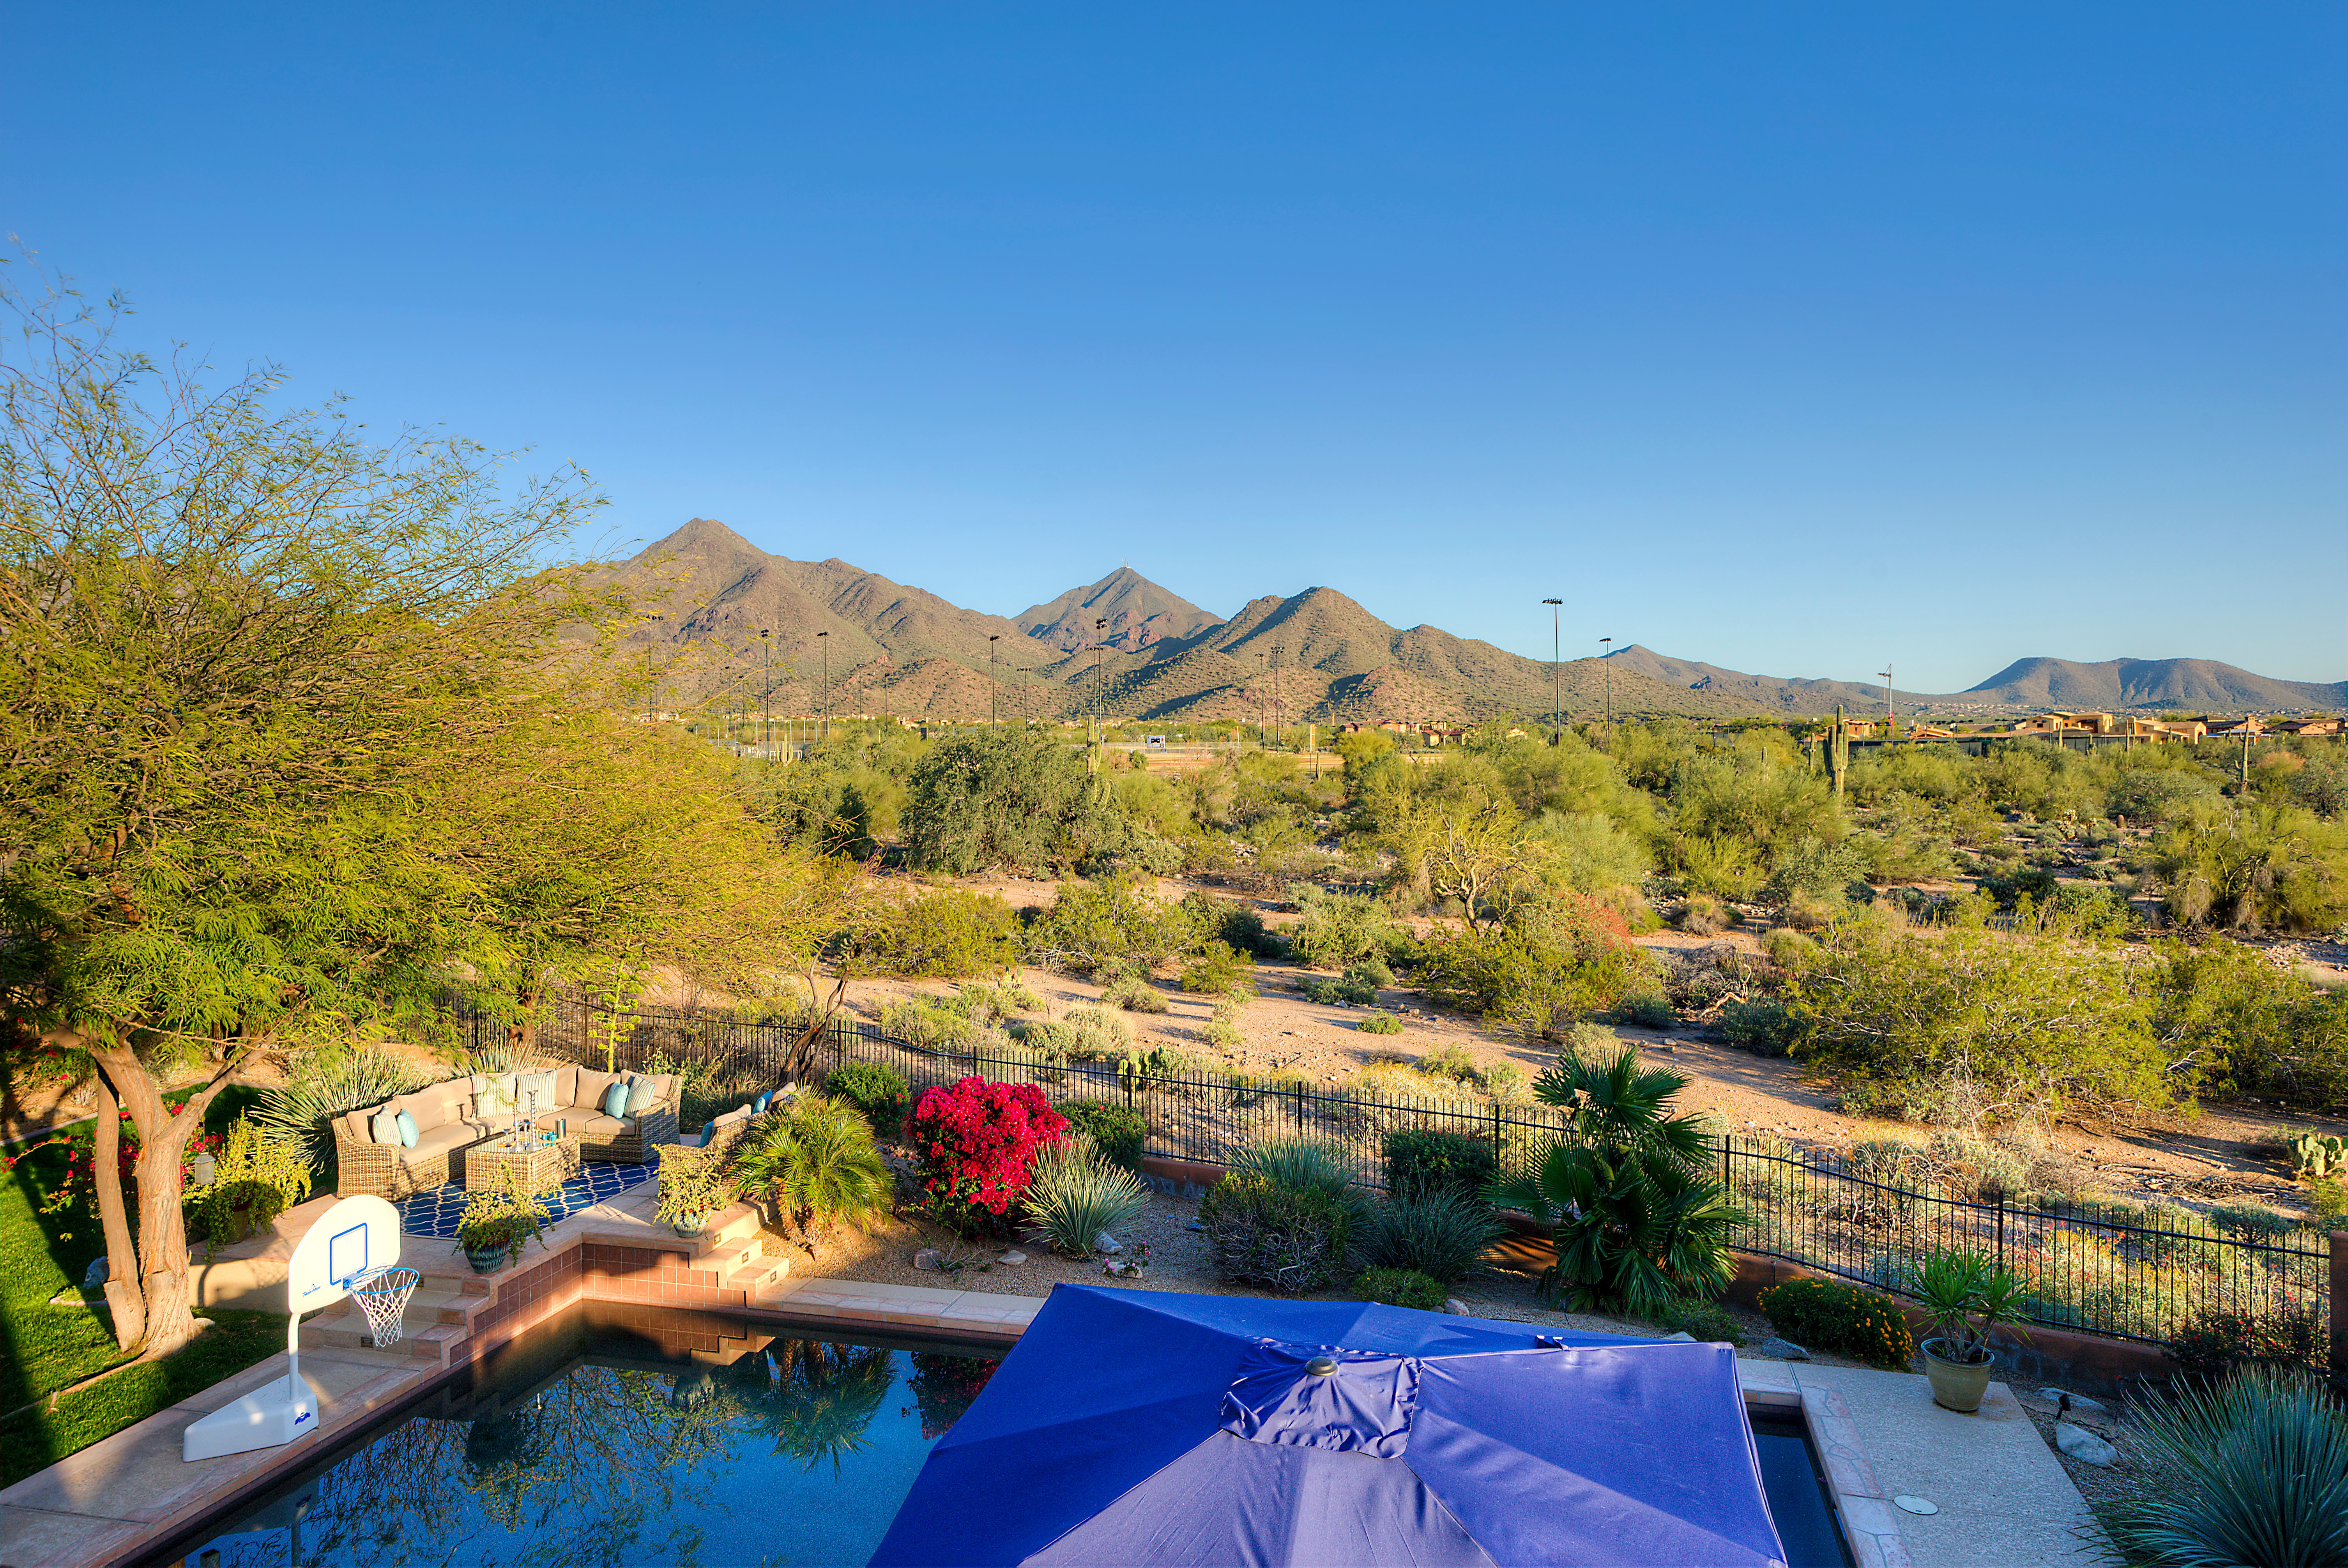 Mountain views are common in many North Scottsdale homes